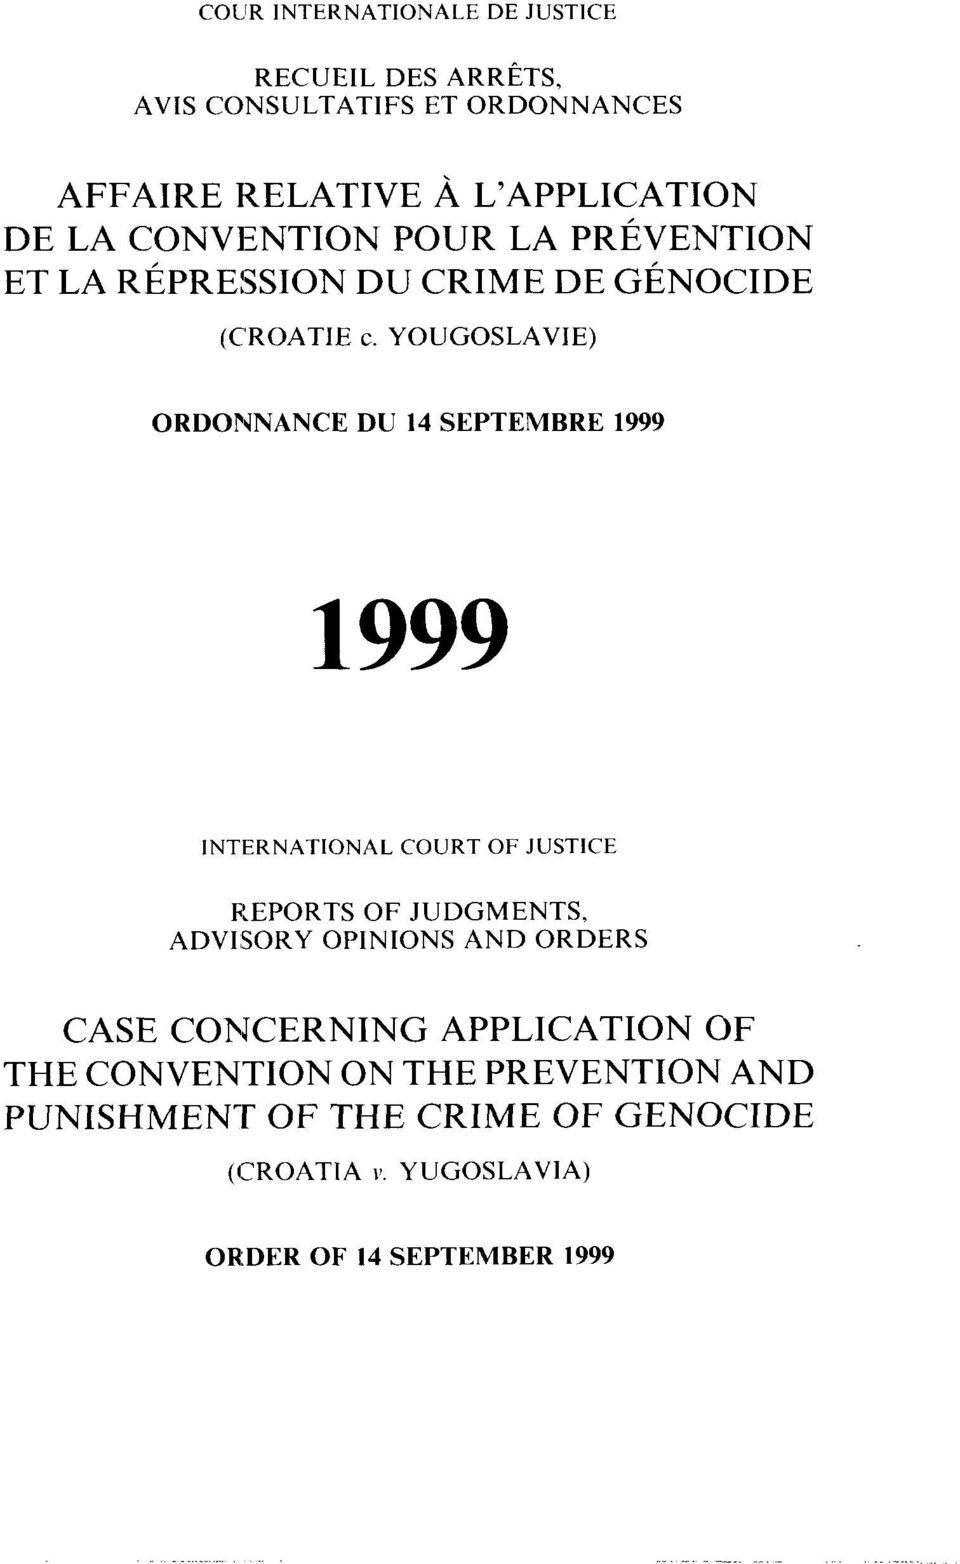 YOUGOSLAVIE) ORDONNANCE DU 14 SEPTEMBRE 1999 INTERNATIONAL COURT OF JUSTICE FLEPORTS OF JUDGMENTS, ADV1,SORY OPINIONS AND